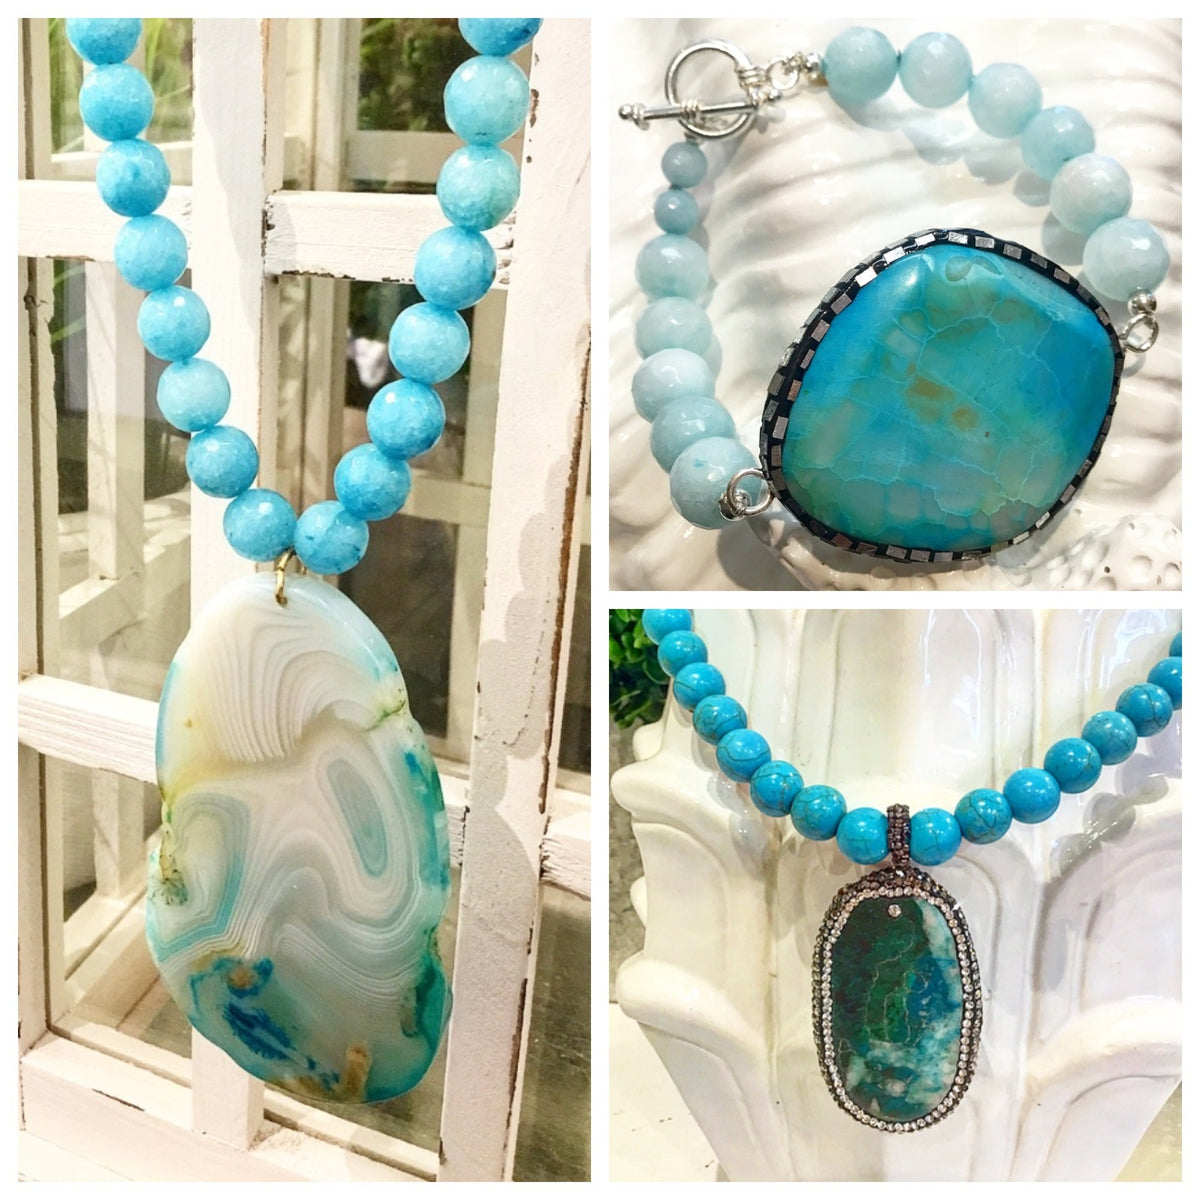 "Want It" Wednesday: Gorgeous, Handmade Ocean-Inspired Jewelry by Teramasu for Your One-of-a-Kind Style